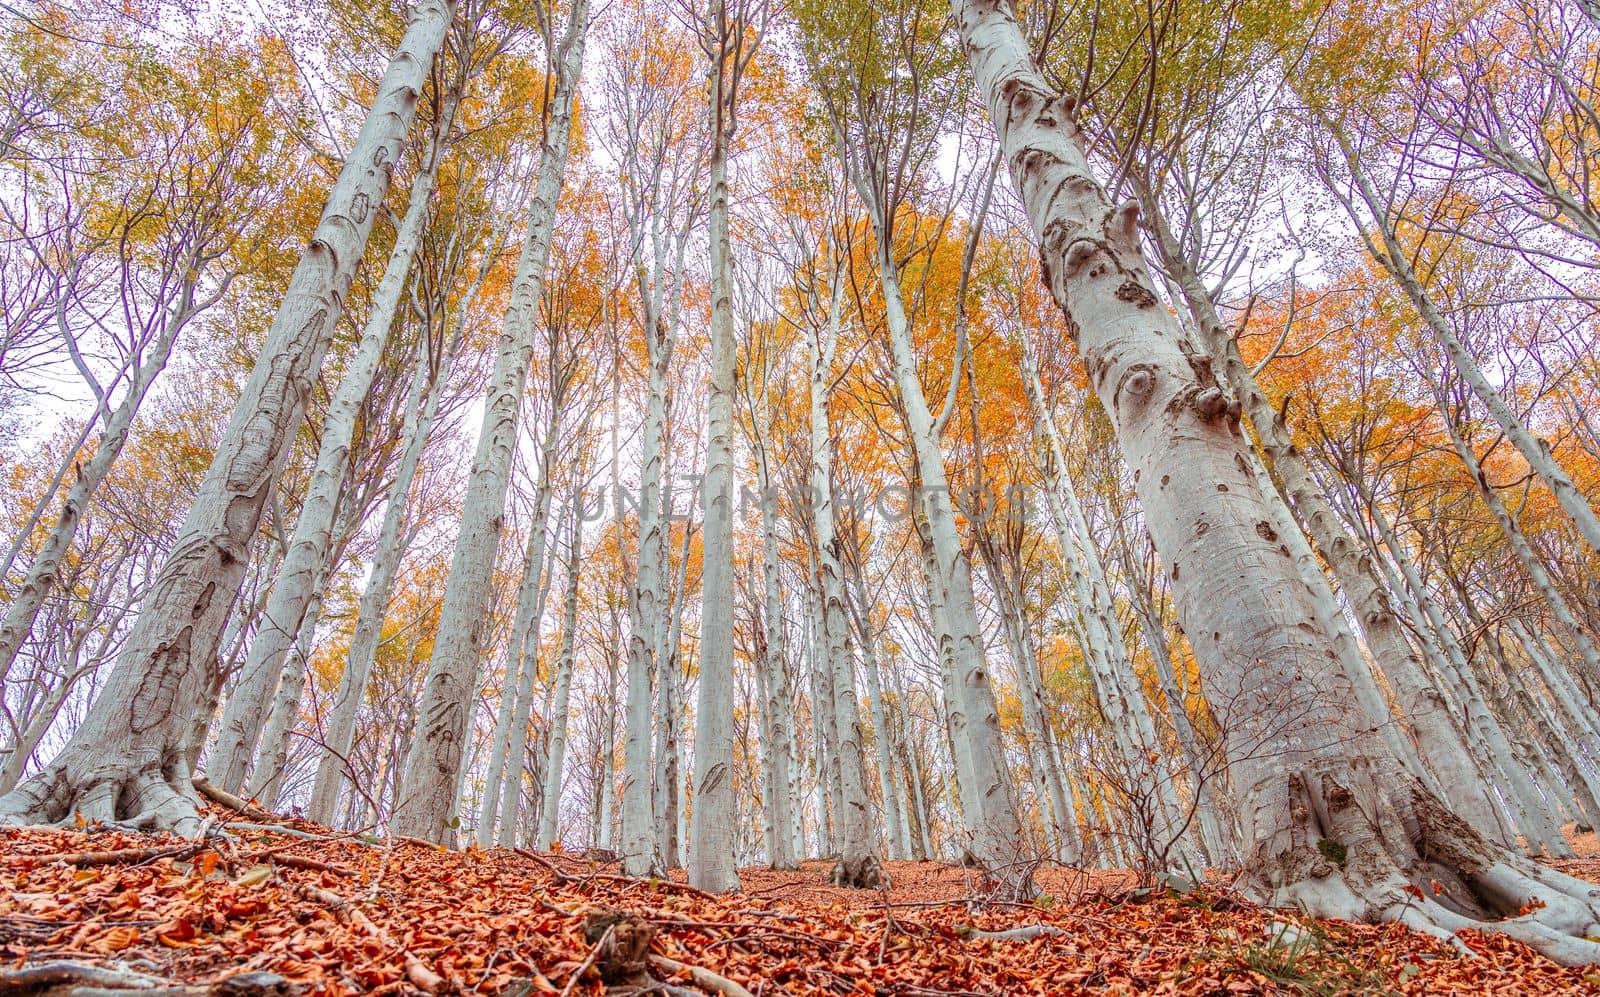 Red forest in autumn at Colle del Melogno in Liguria, Italy. Foliage.